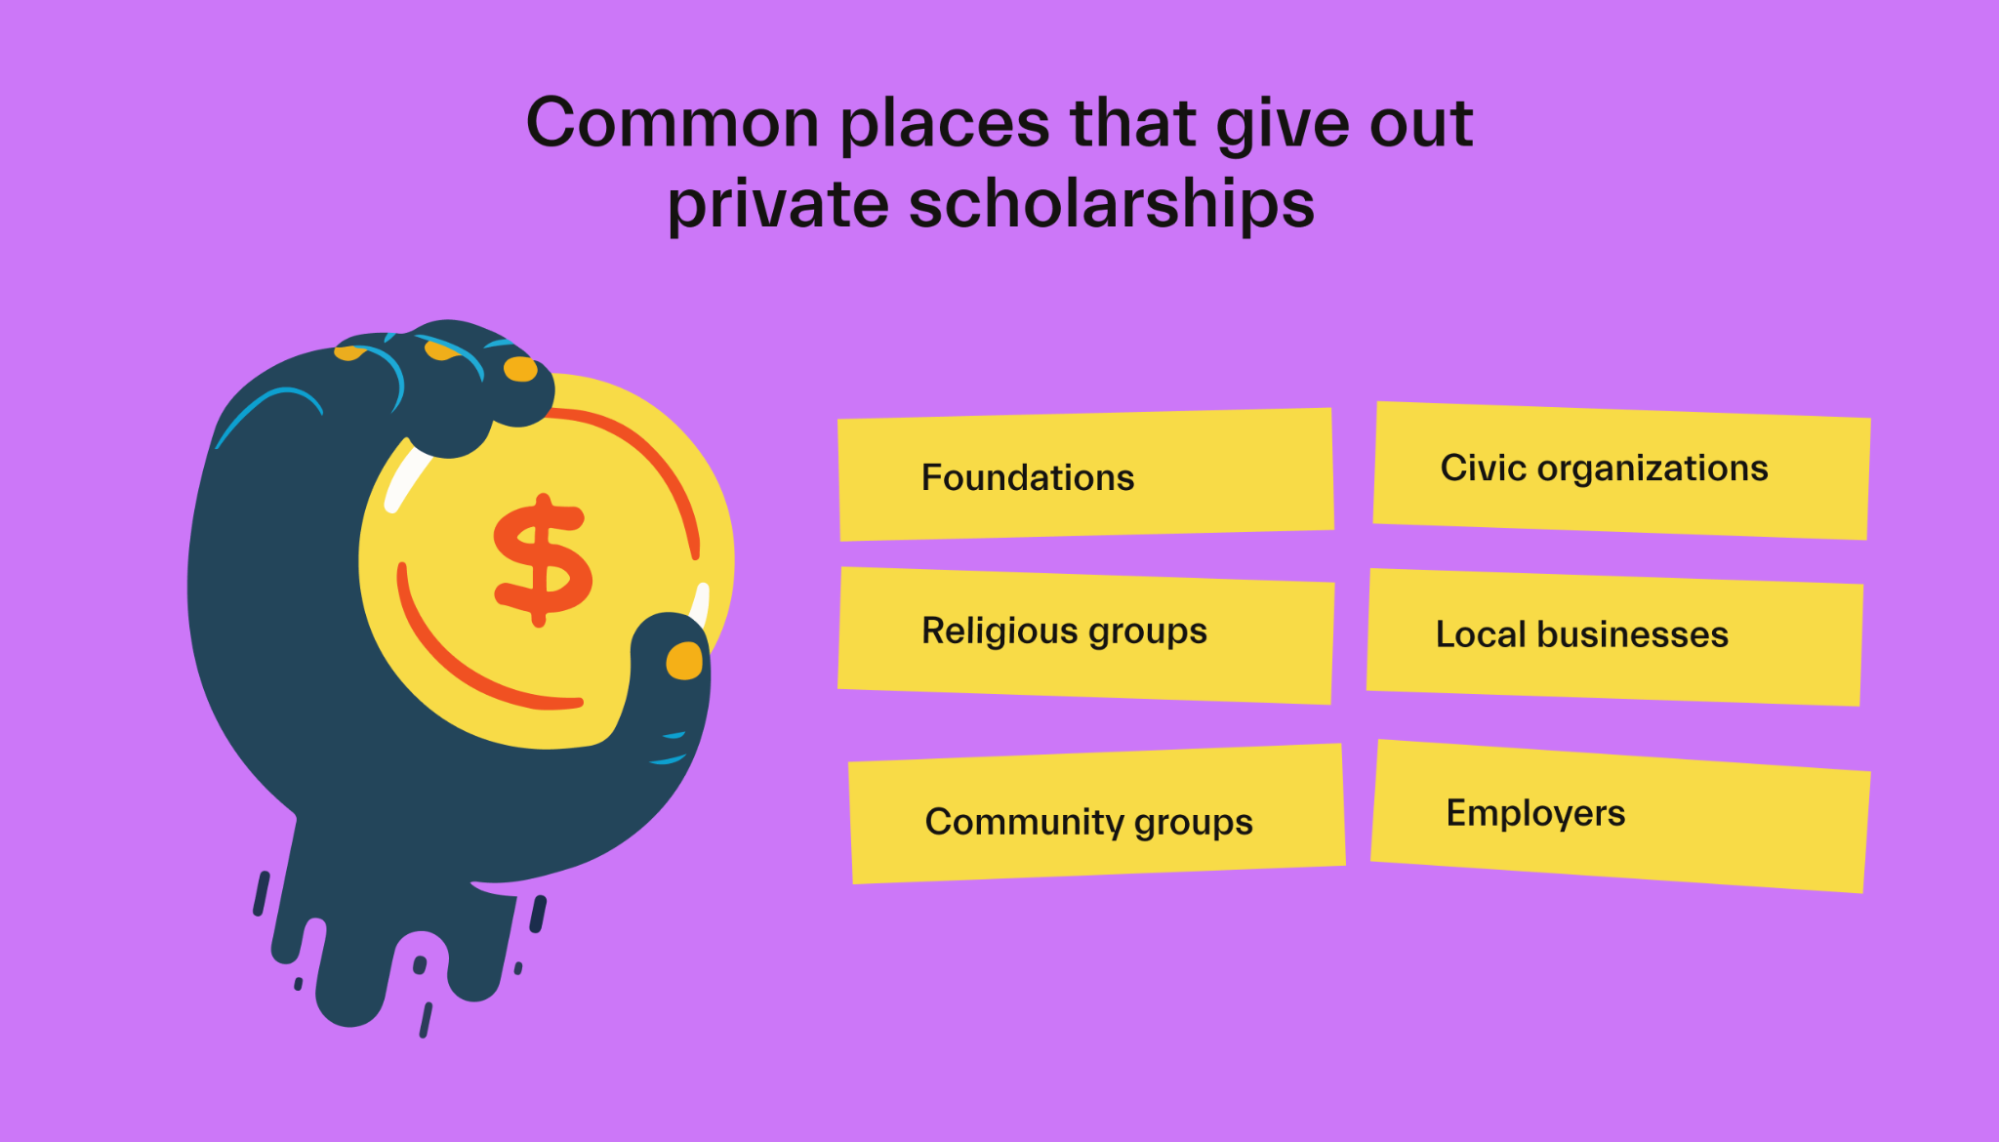 Common places that give out private scholarships